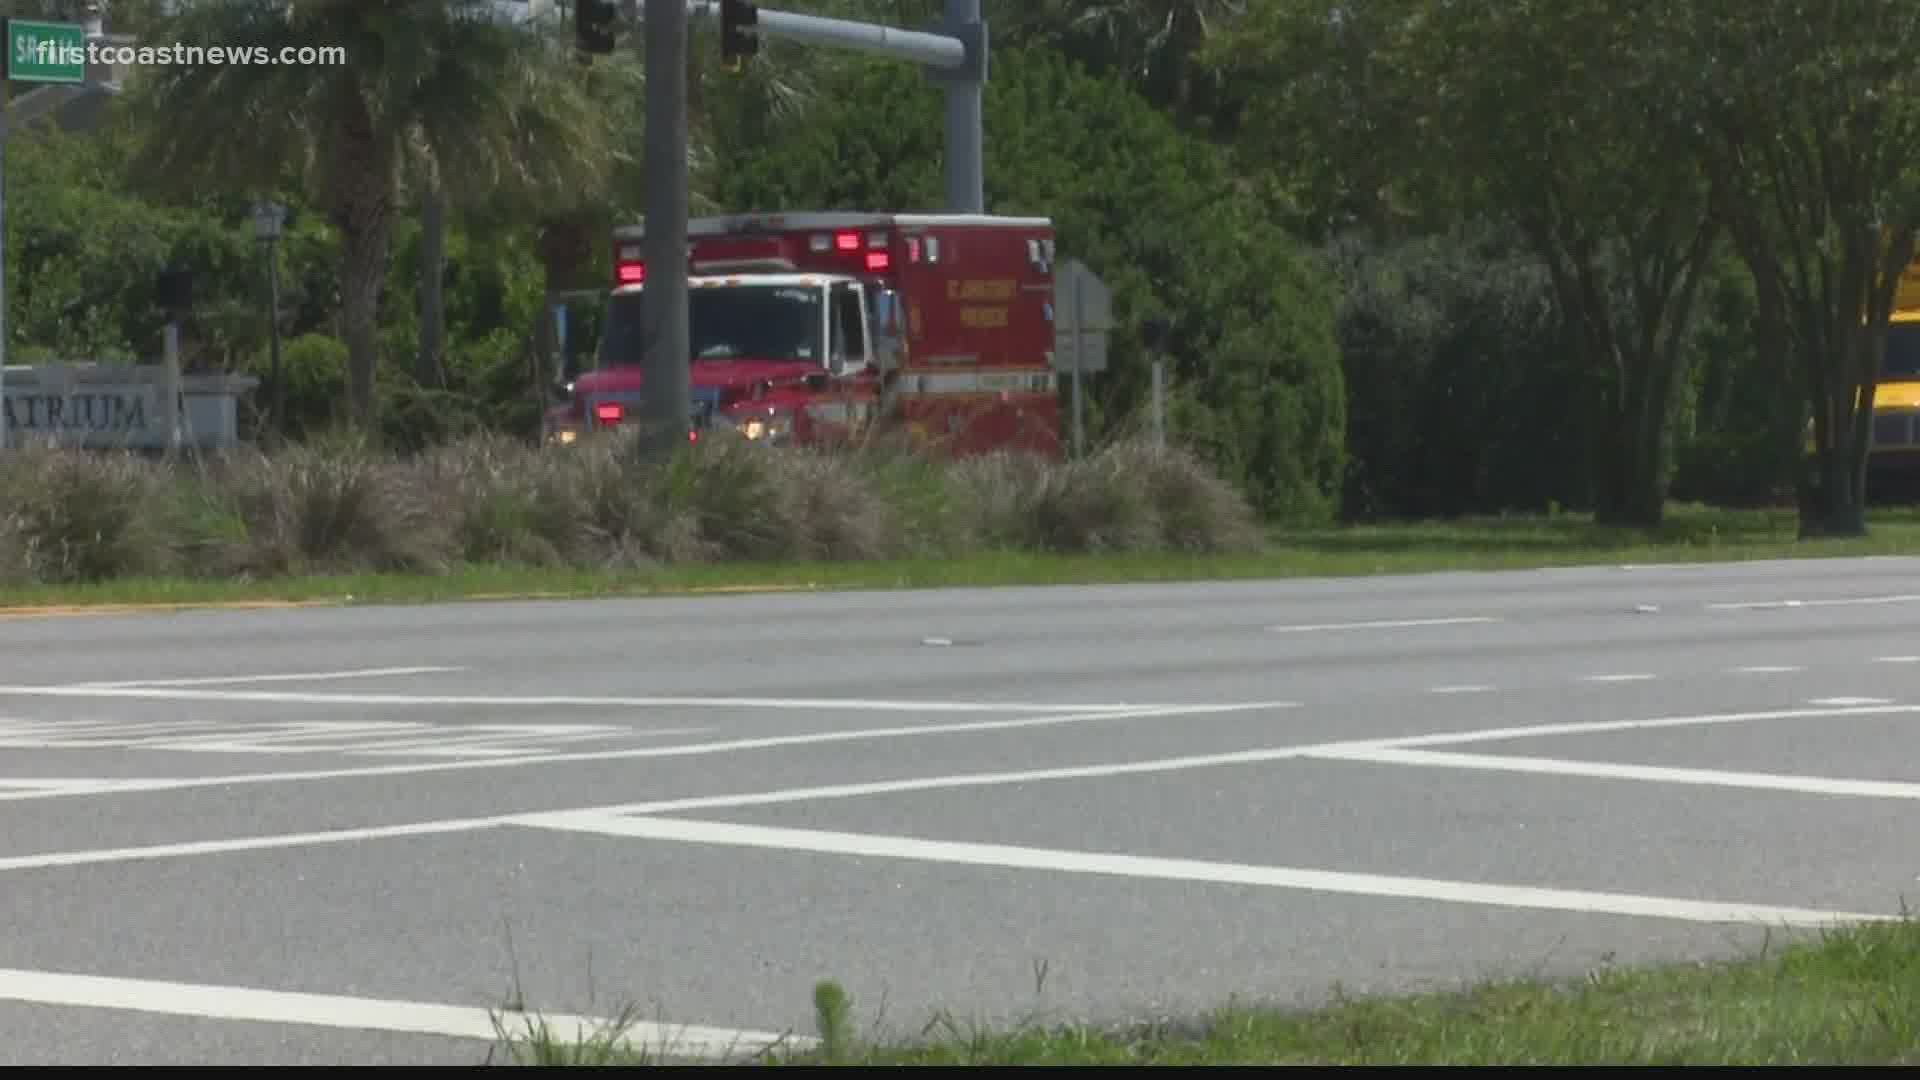 Deputies said they were following a stolen vehicle on A1A in Ponte Vedra when the vehicle opened fire on deputies.